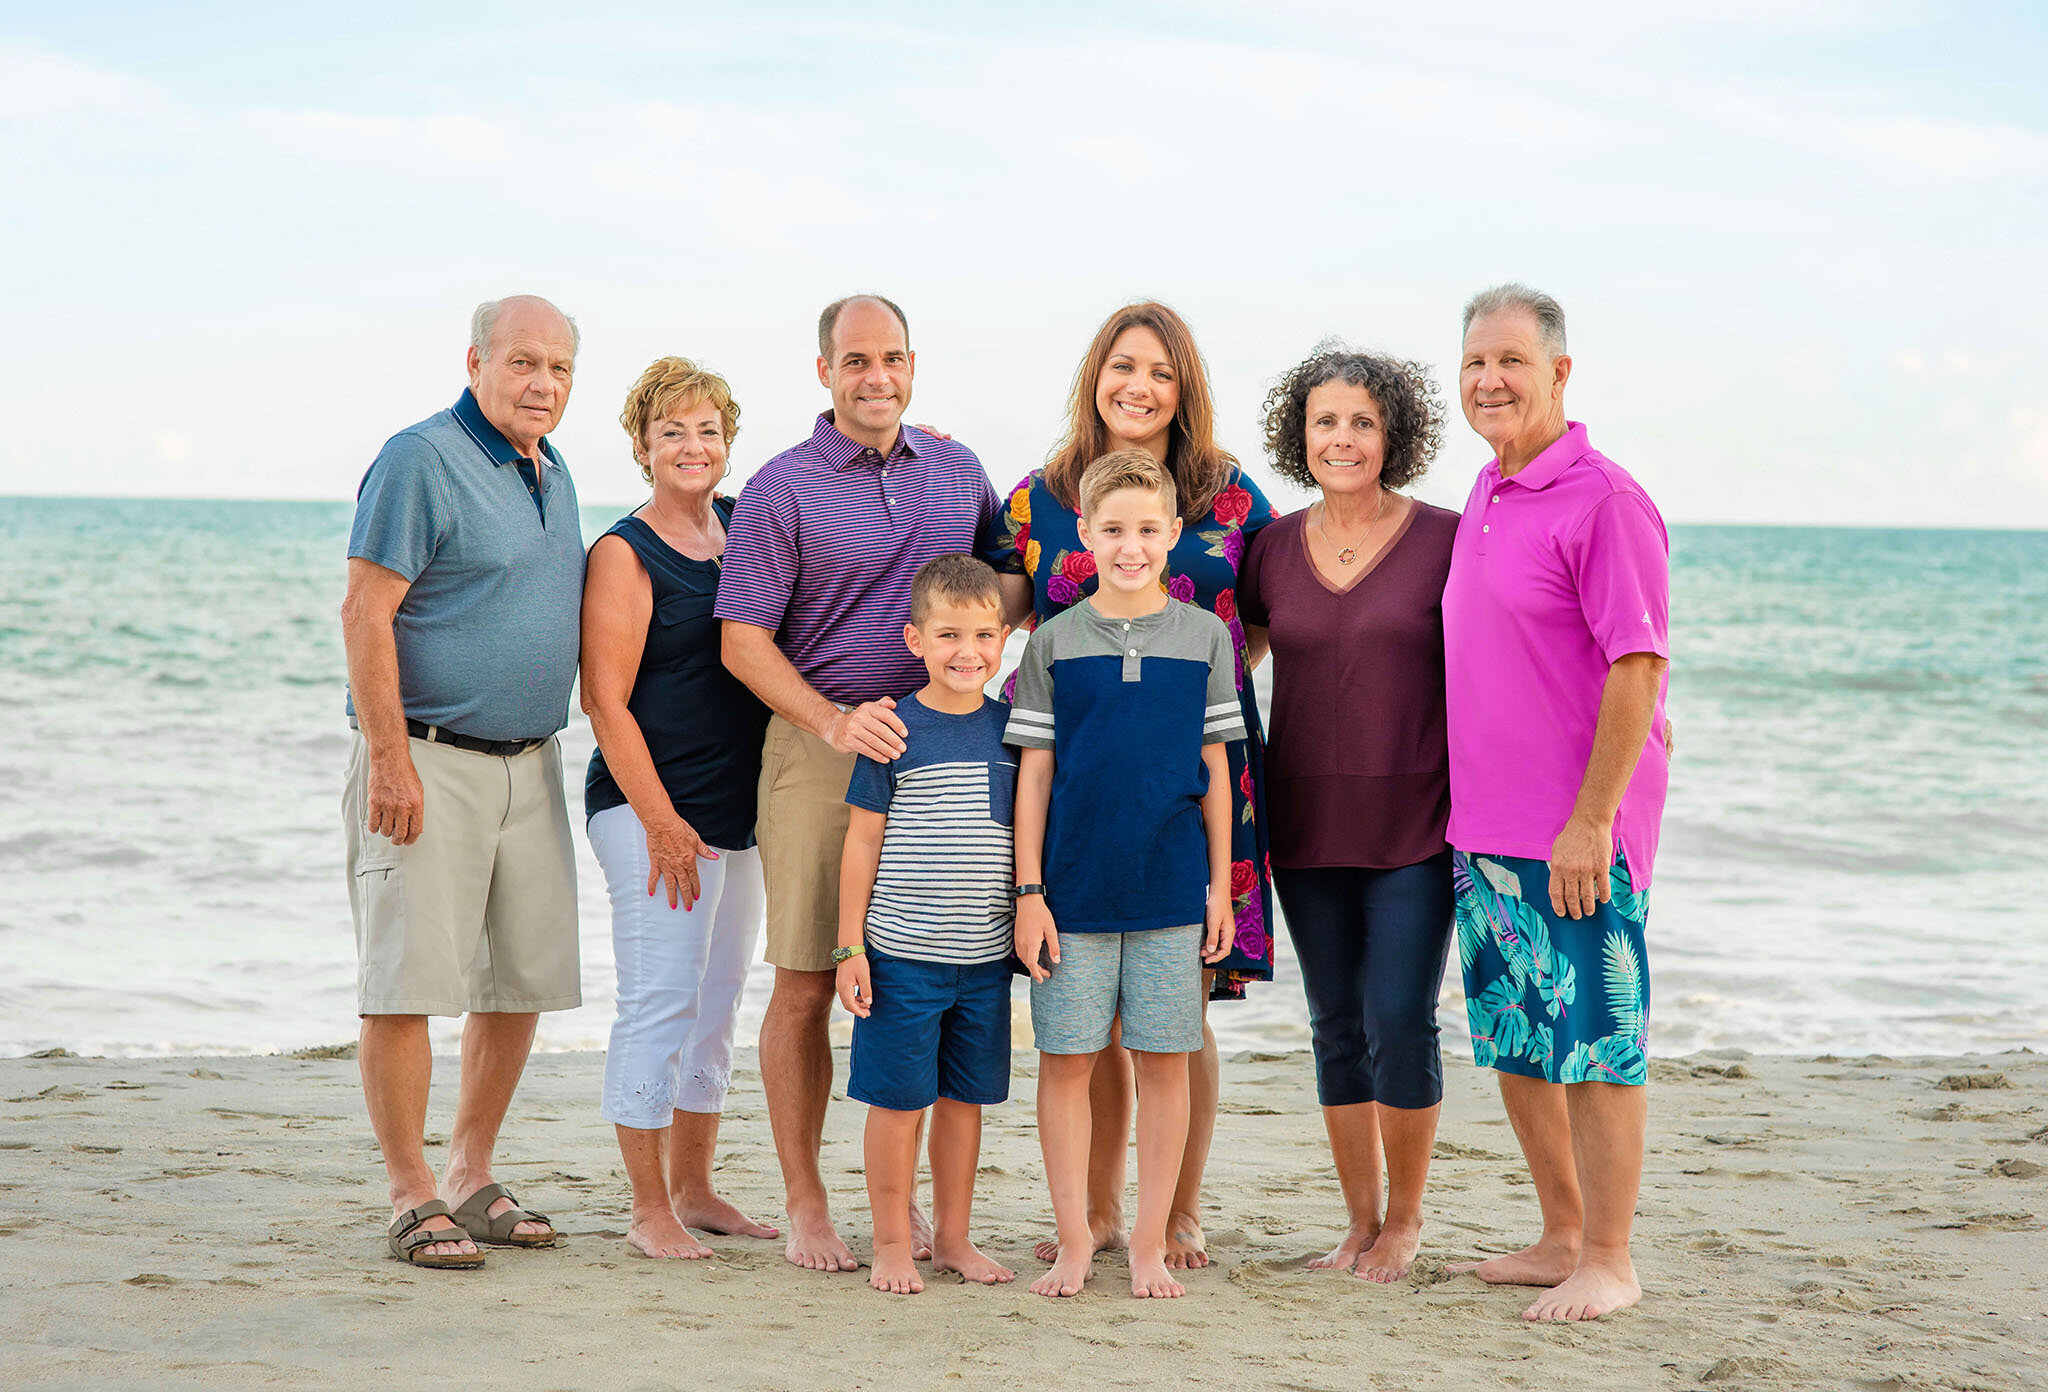 Family Portraits at the beach.